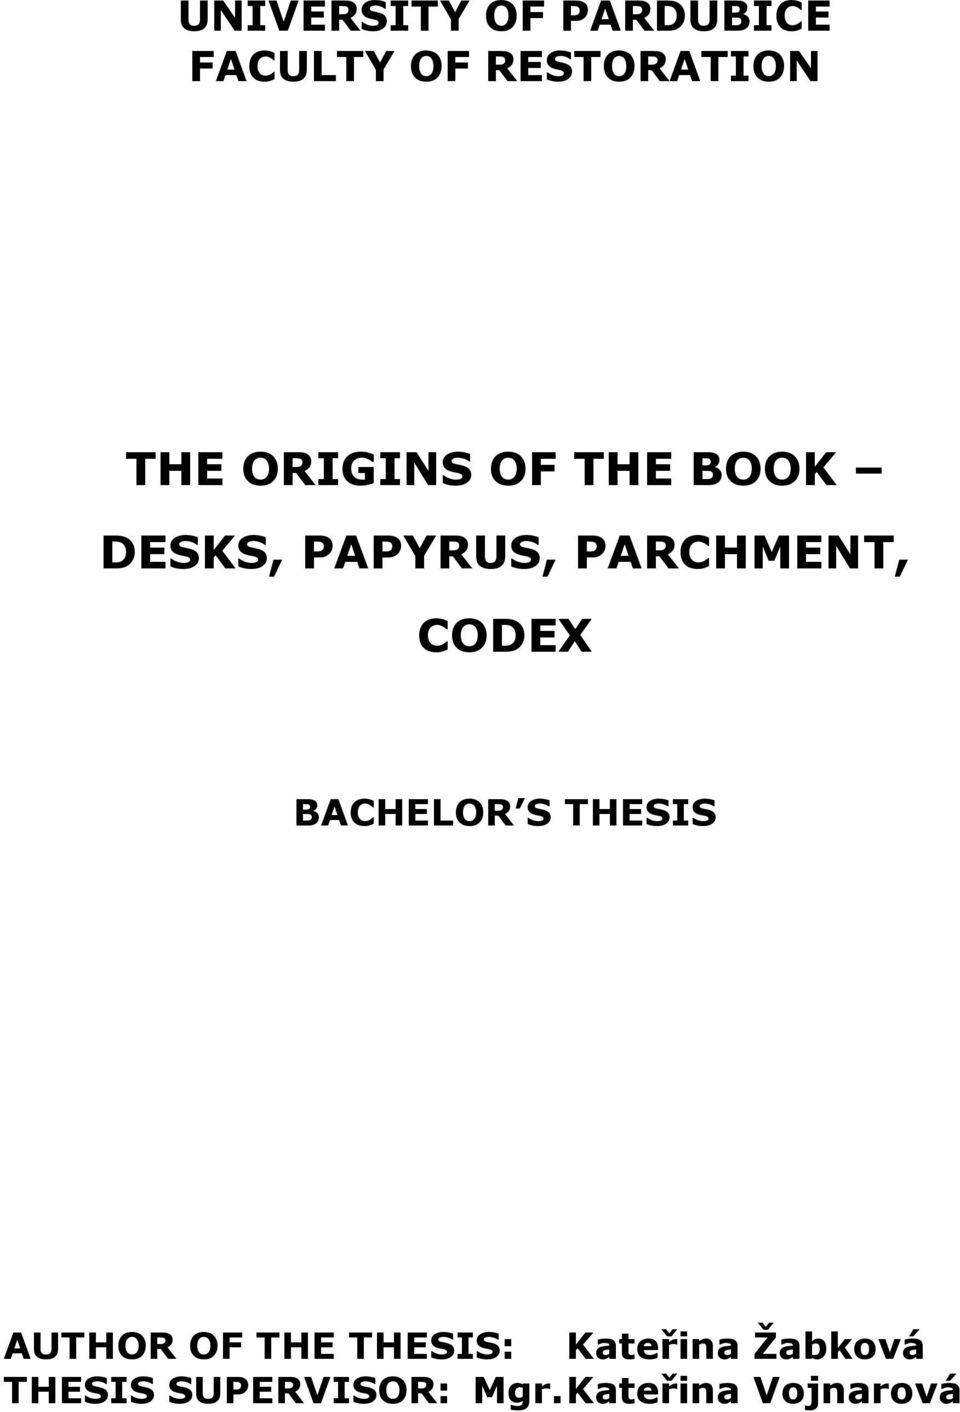 CODEX BACHELOR S THESIS AUTHOR OF THE THESIS: